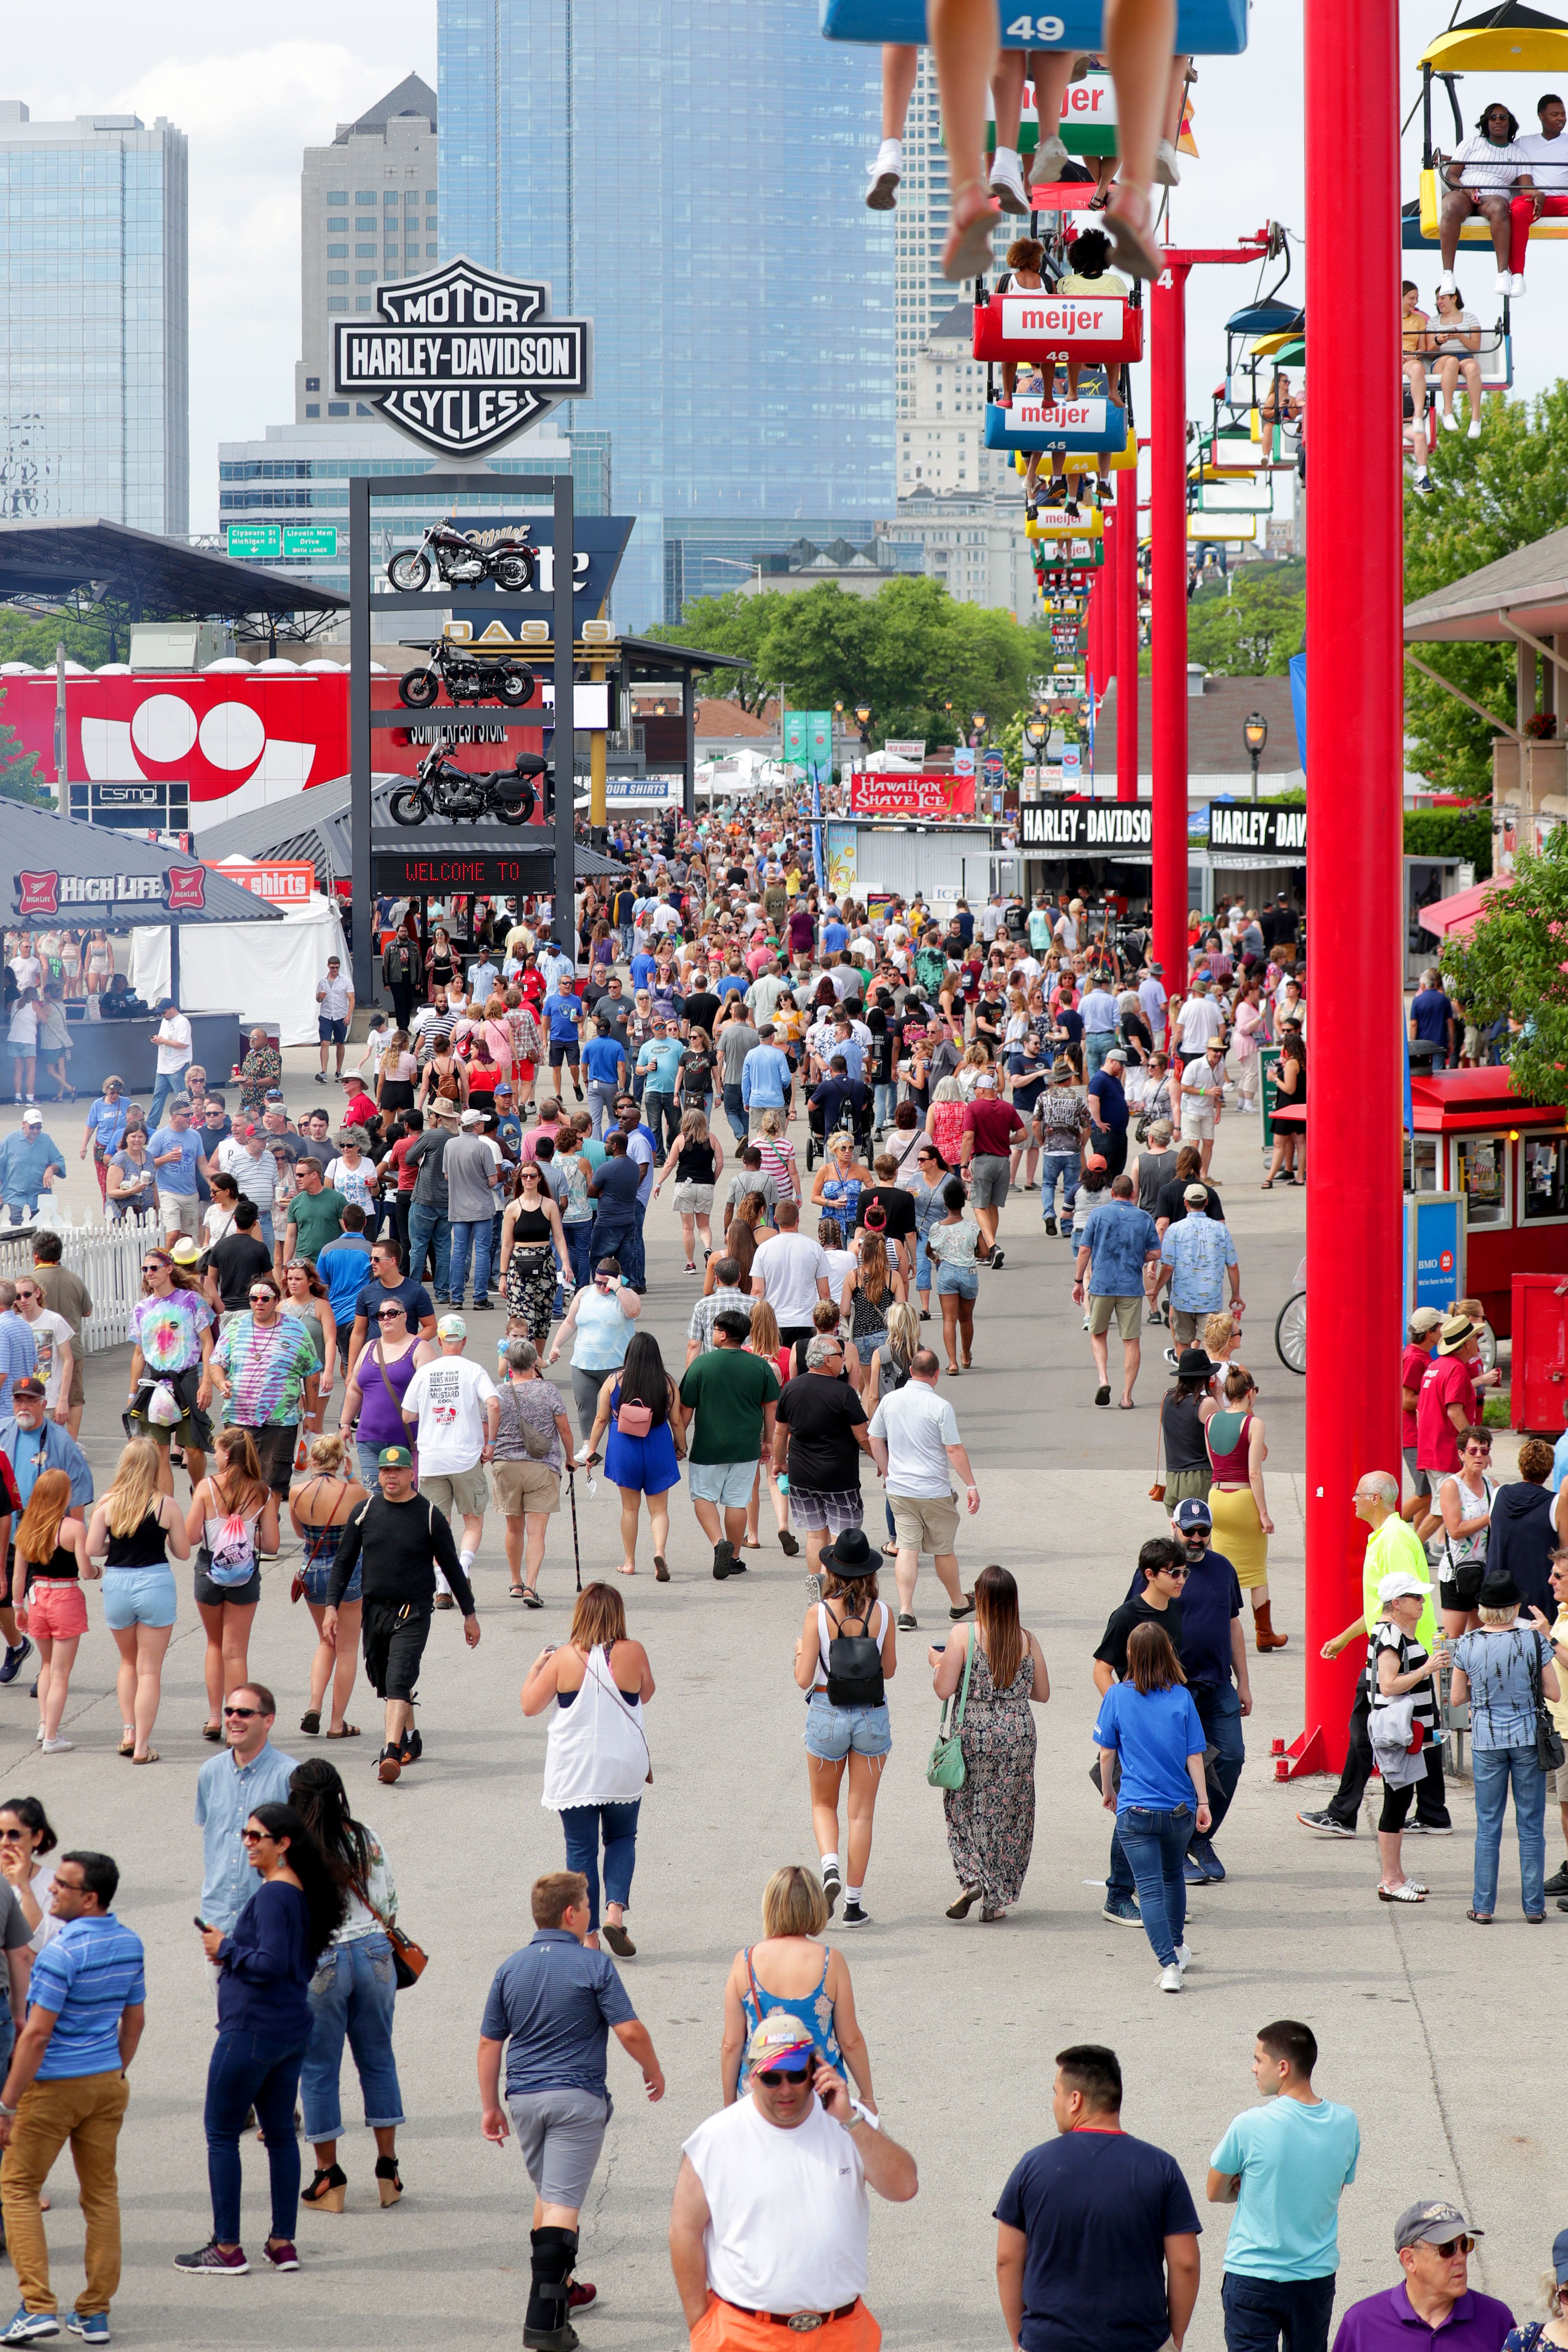 Milwaukee's Summerfest confirms 2021 festival will be over three weekends